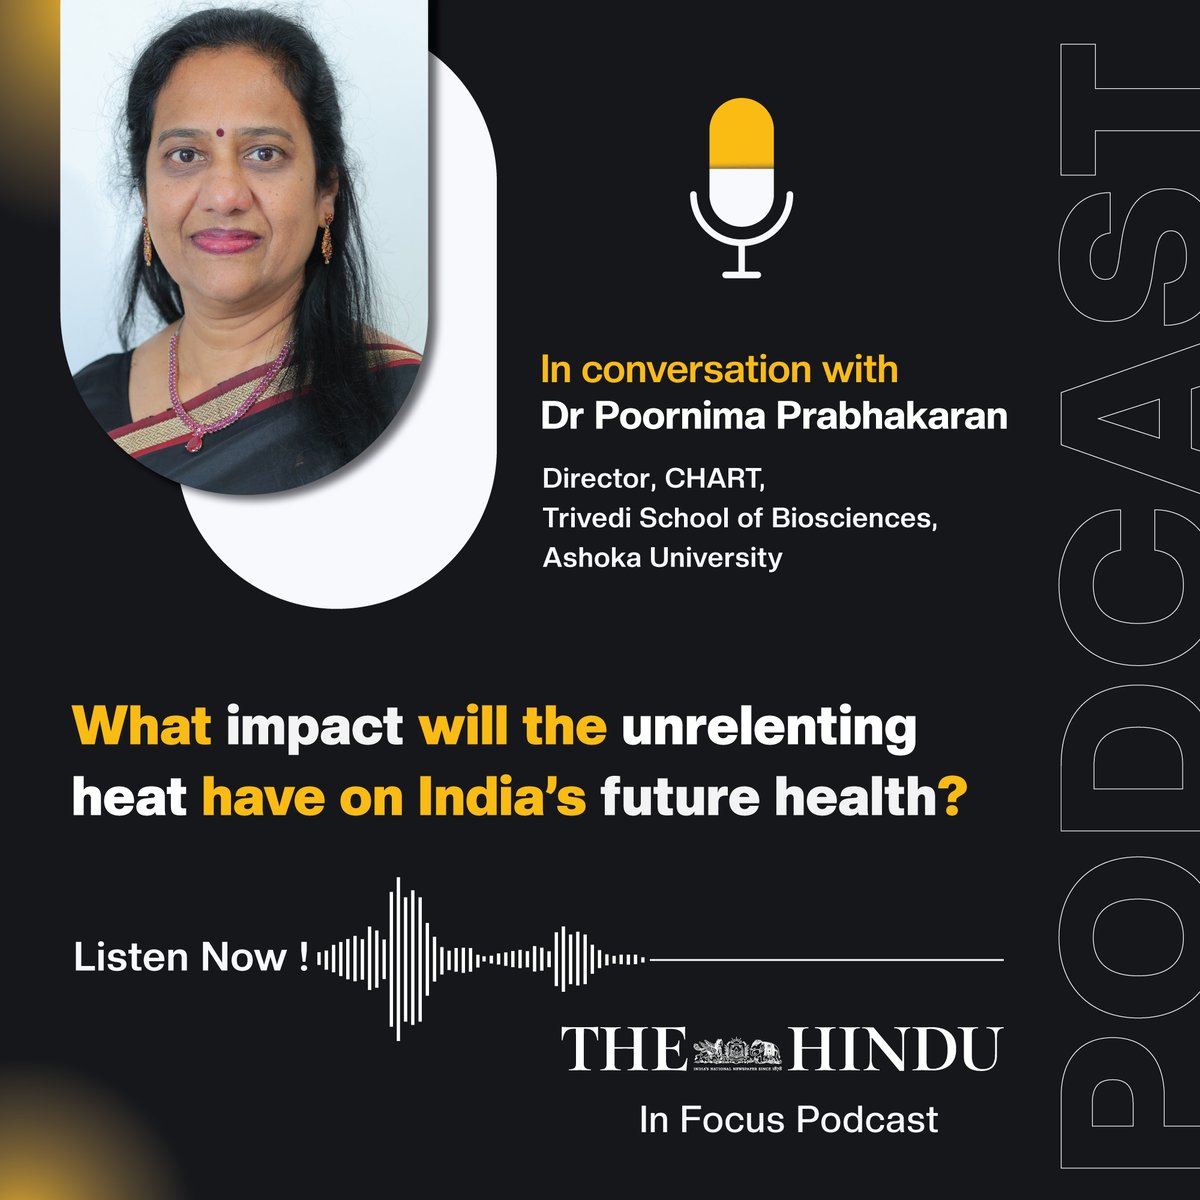 In a recent #podcast session with @the_hindu. @DrPoornimaP, Director, @CHART_TSB, @AshokaUniv talks on #heatwaves occurring earlier, intensifying, lasting longer & their implications on #humanhealth, food security & extreme #weather events. 

🎙️Listen now: bit.ly/3wibgBa